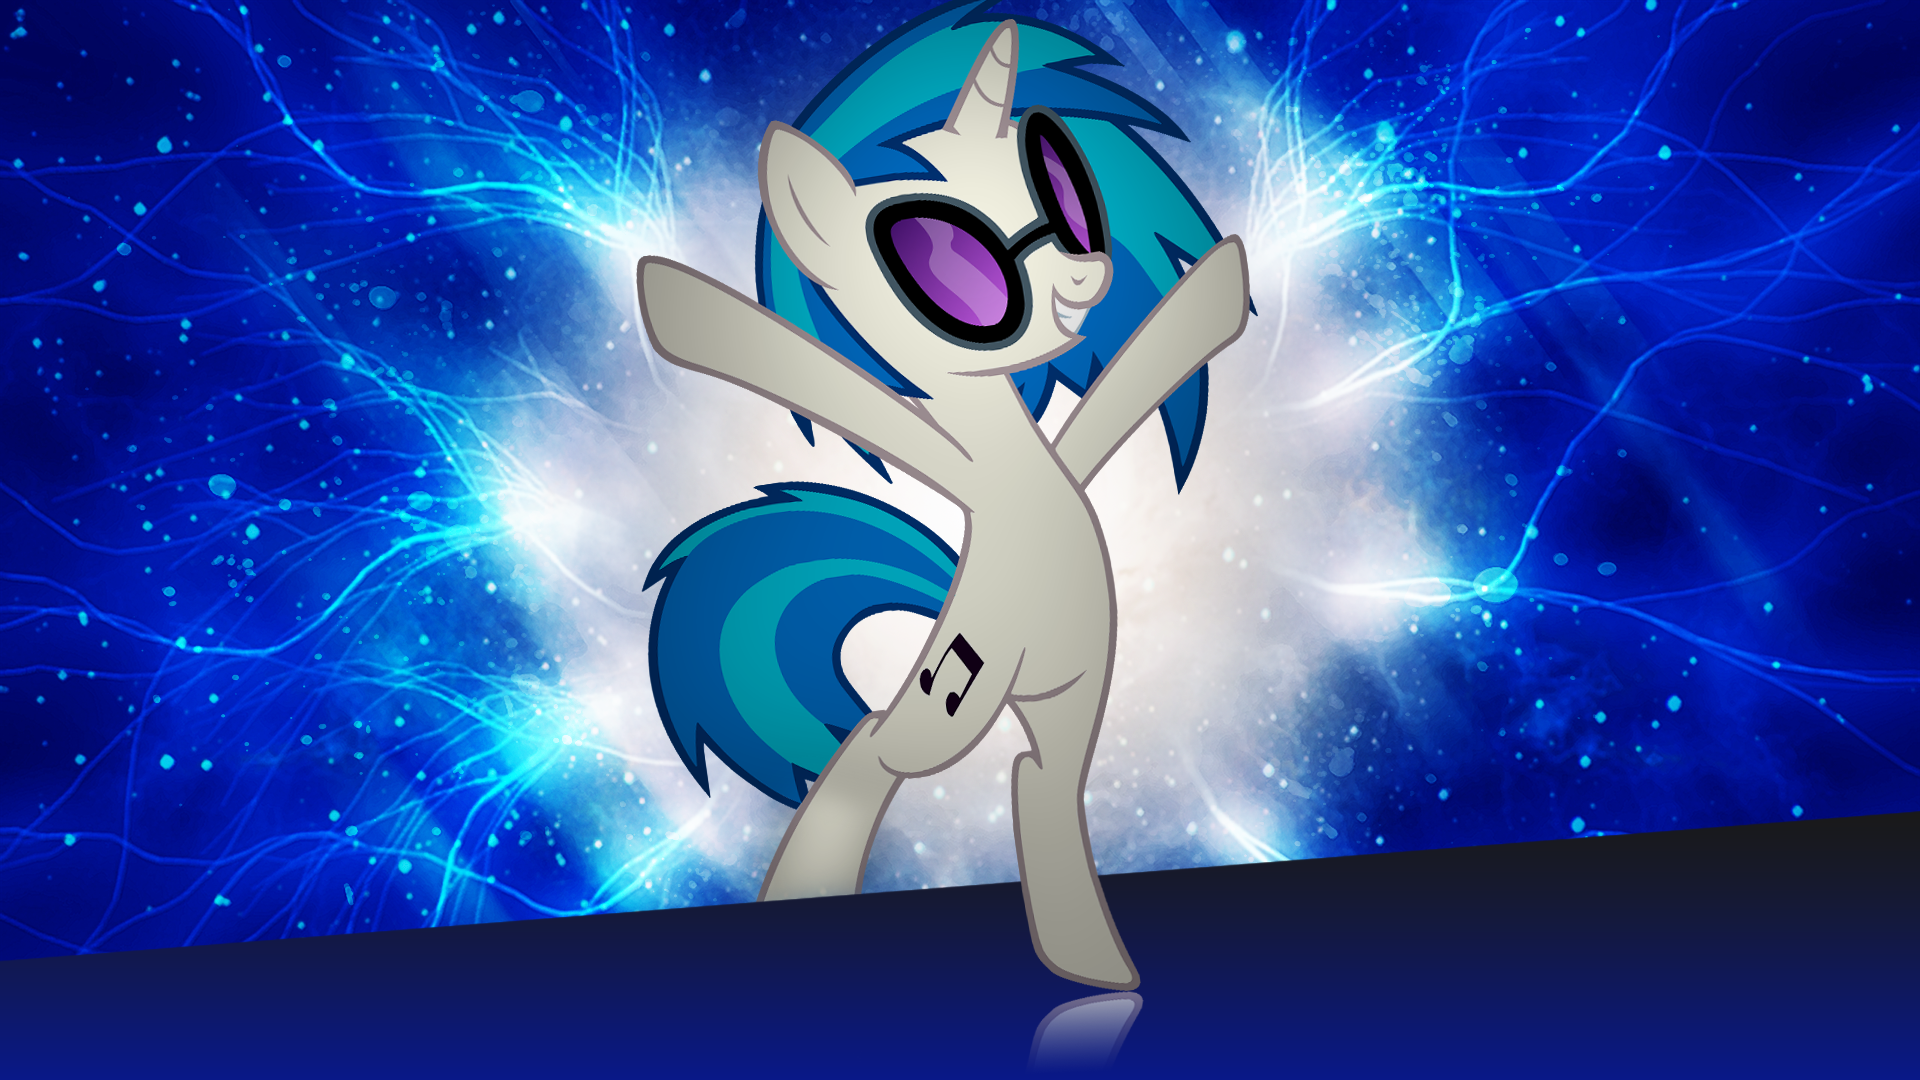 Vinyl Scratch Wallpaper by TygerxL and UP1TER